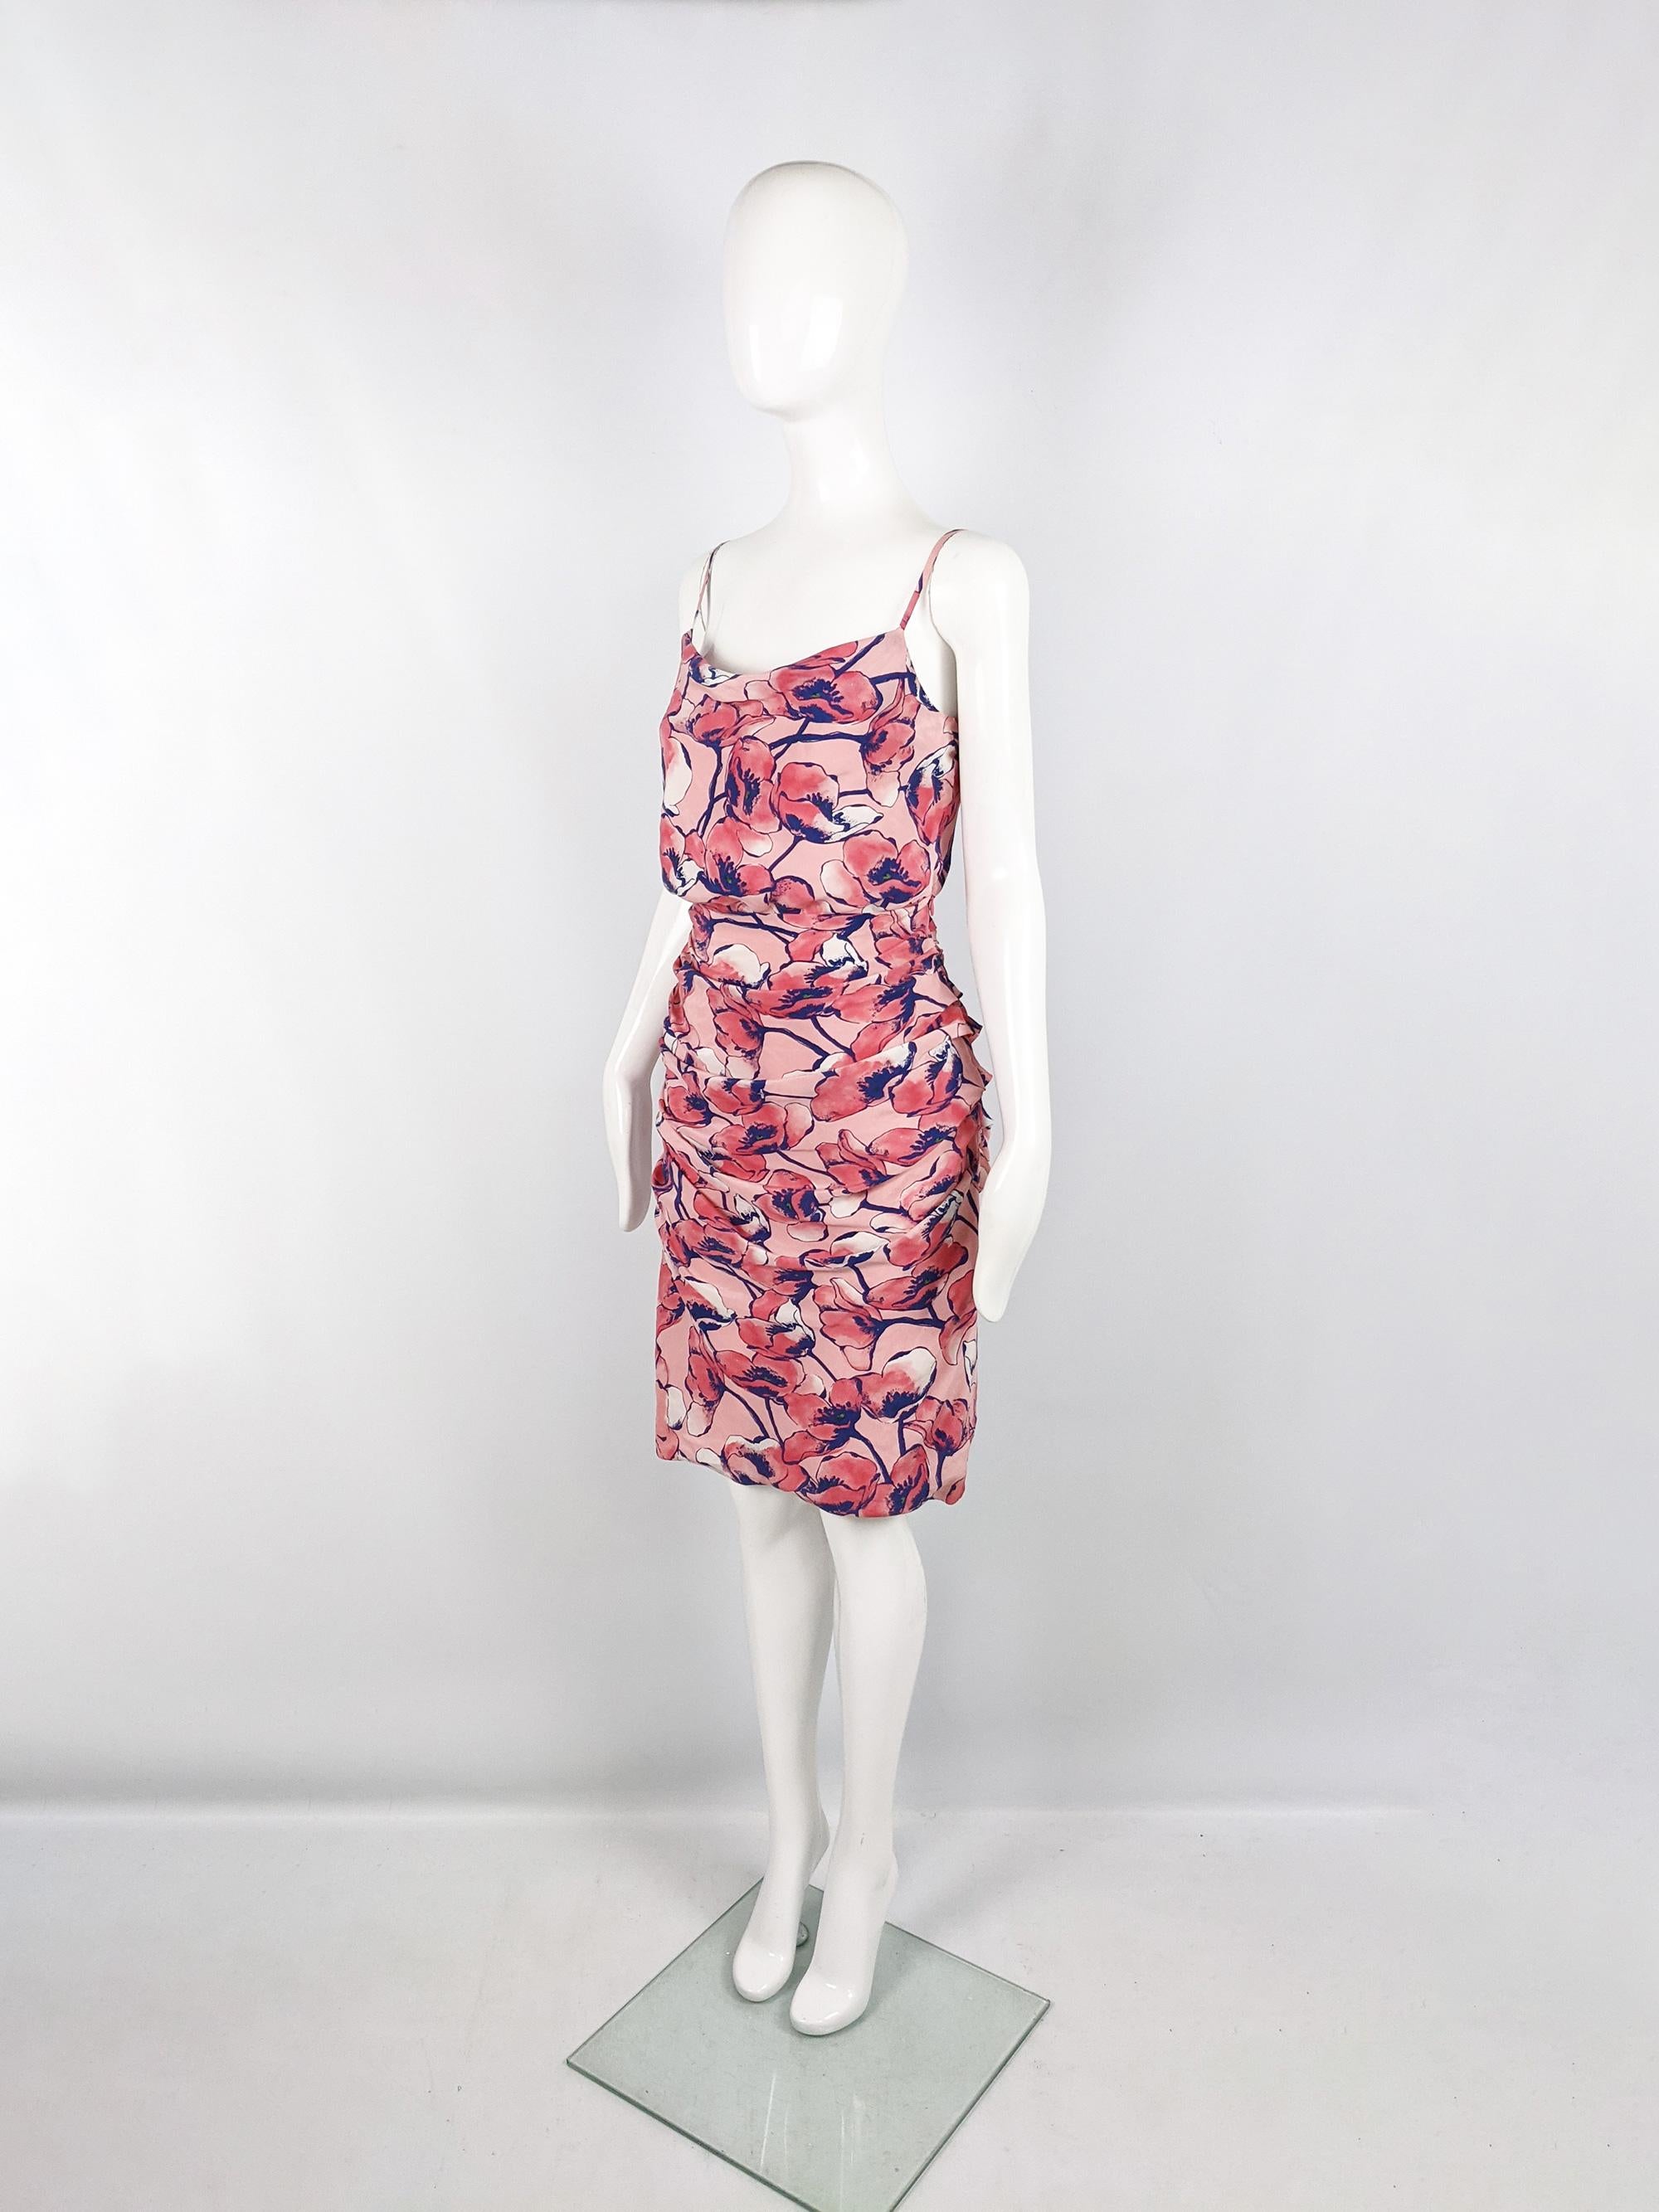 Moschino Pink Silk Vintage Ruched Flower Print Sleeveless Party Dress, 2000s  In Excellent Condition For Sale In Doncaster, South Yorkshire